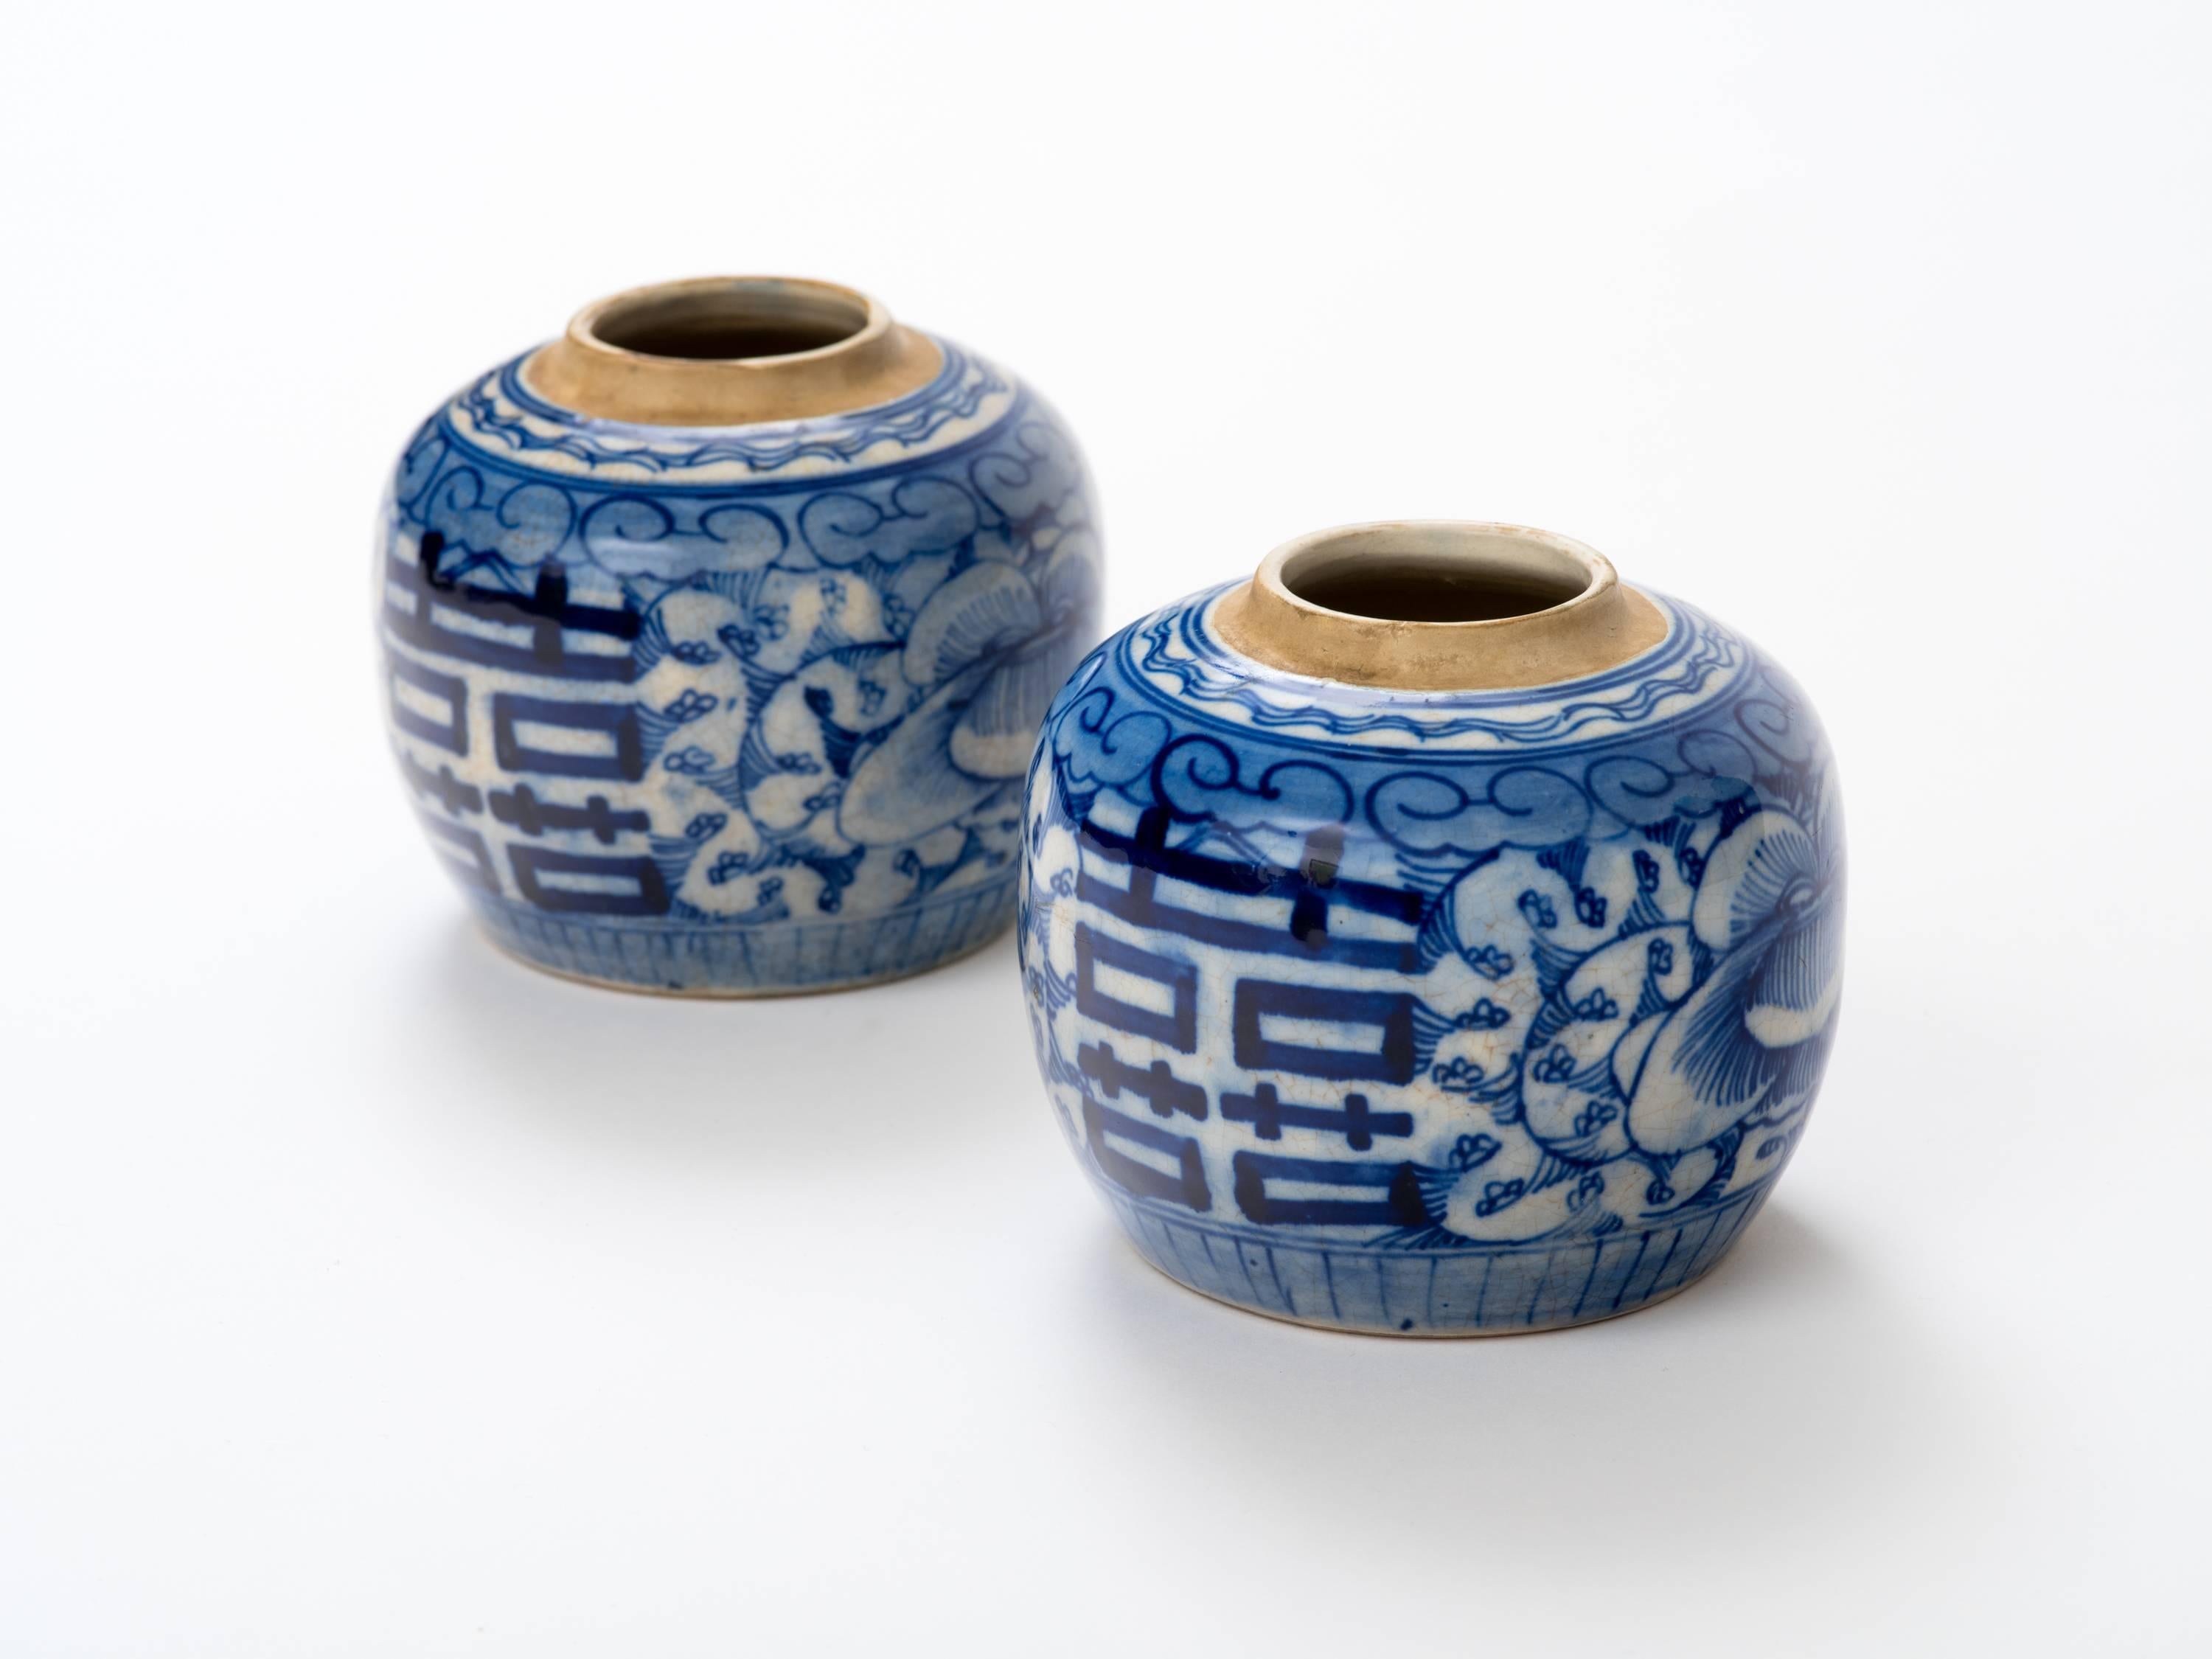 Antique 19th century pair of blue and white ginger jars hand decorated with lotuses and double happiness symbols.